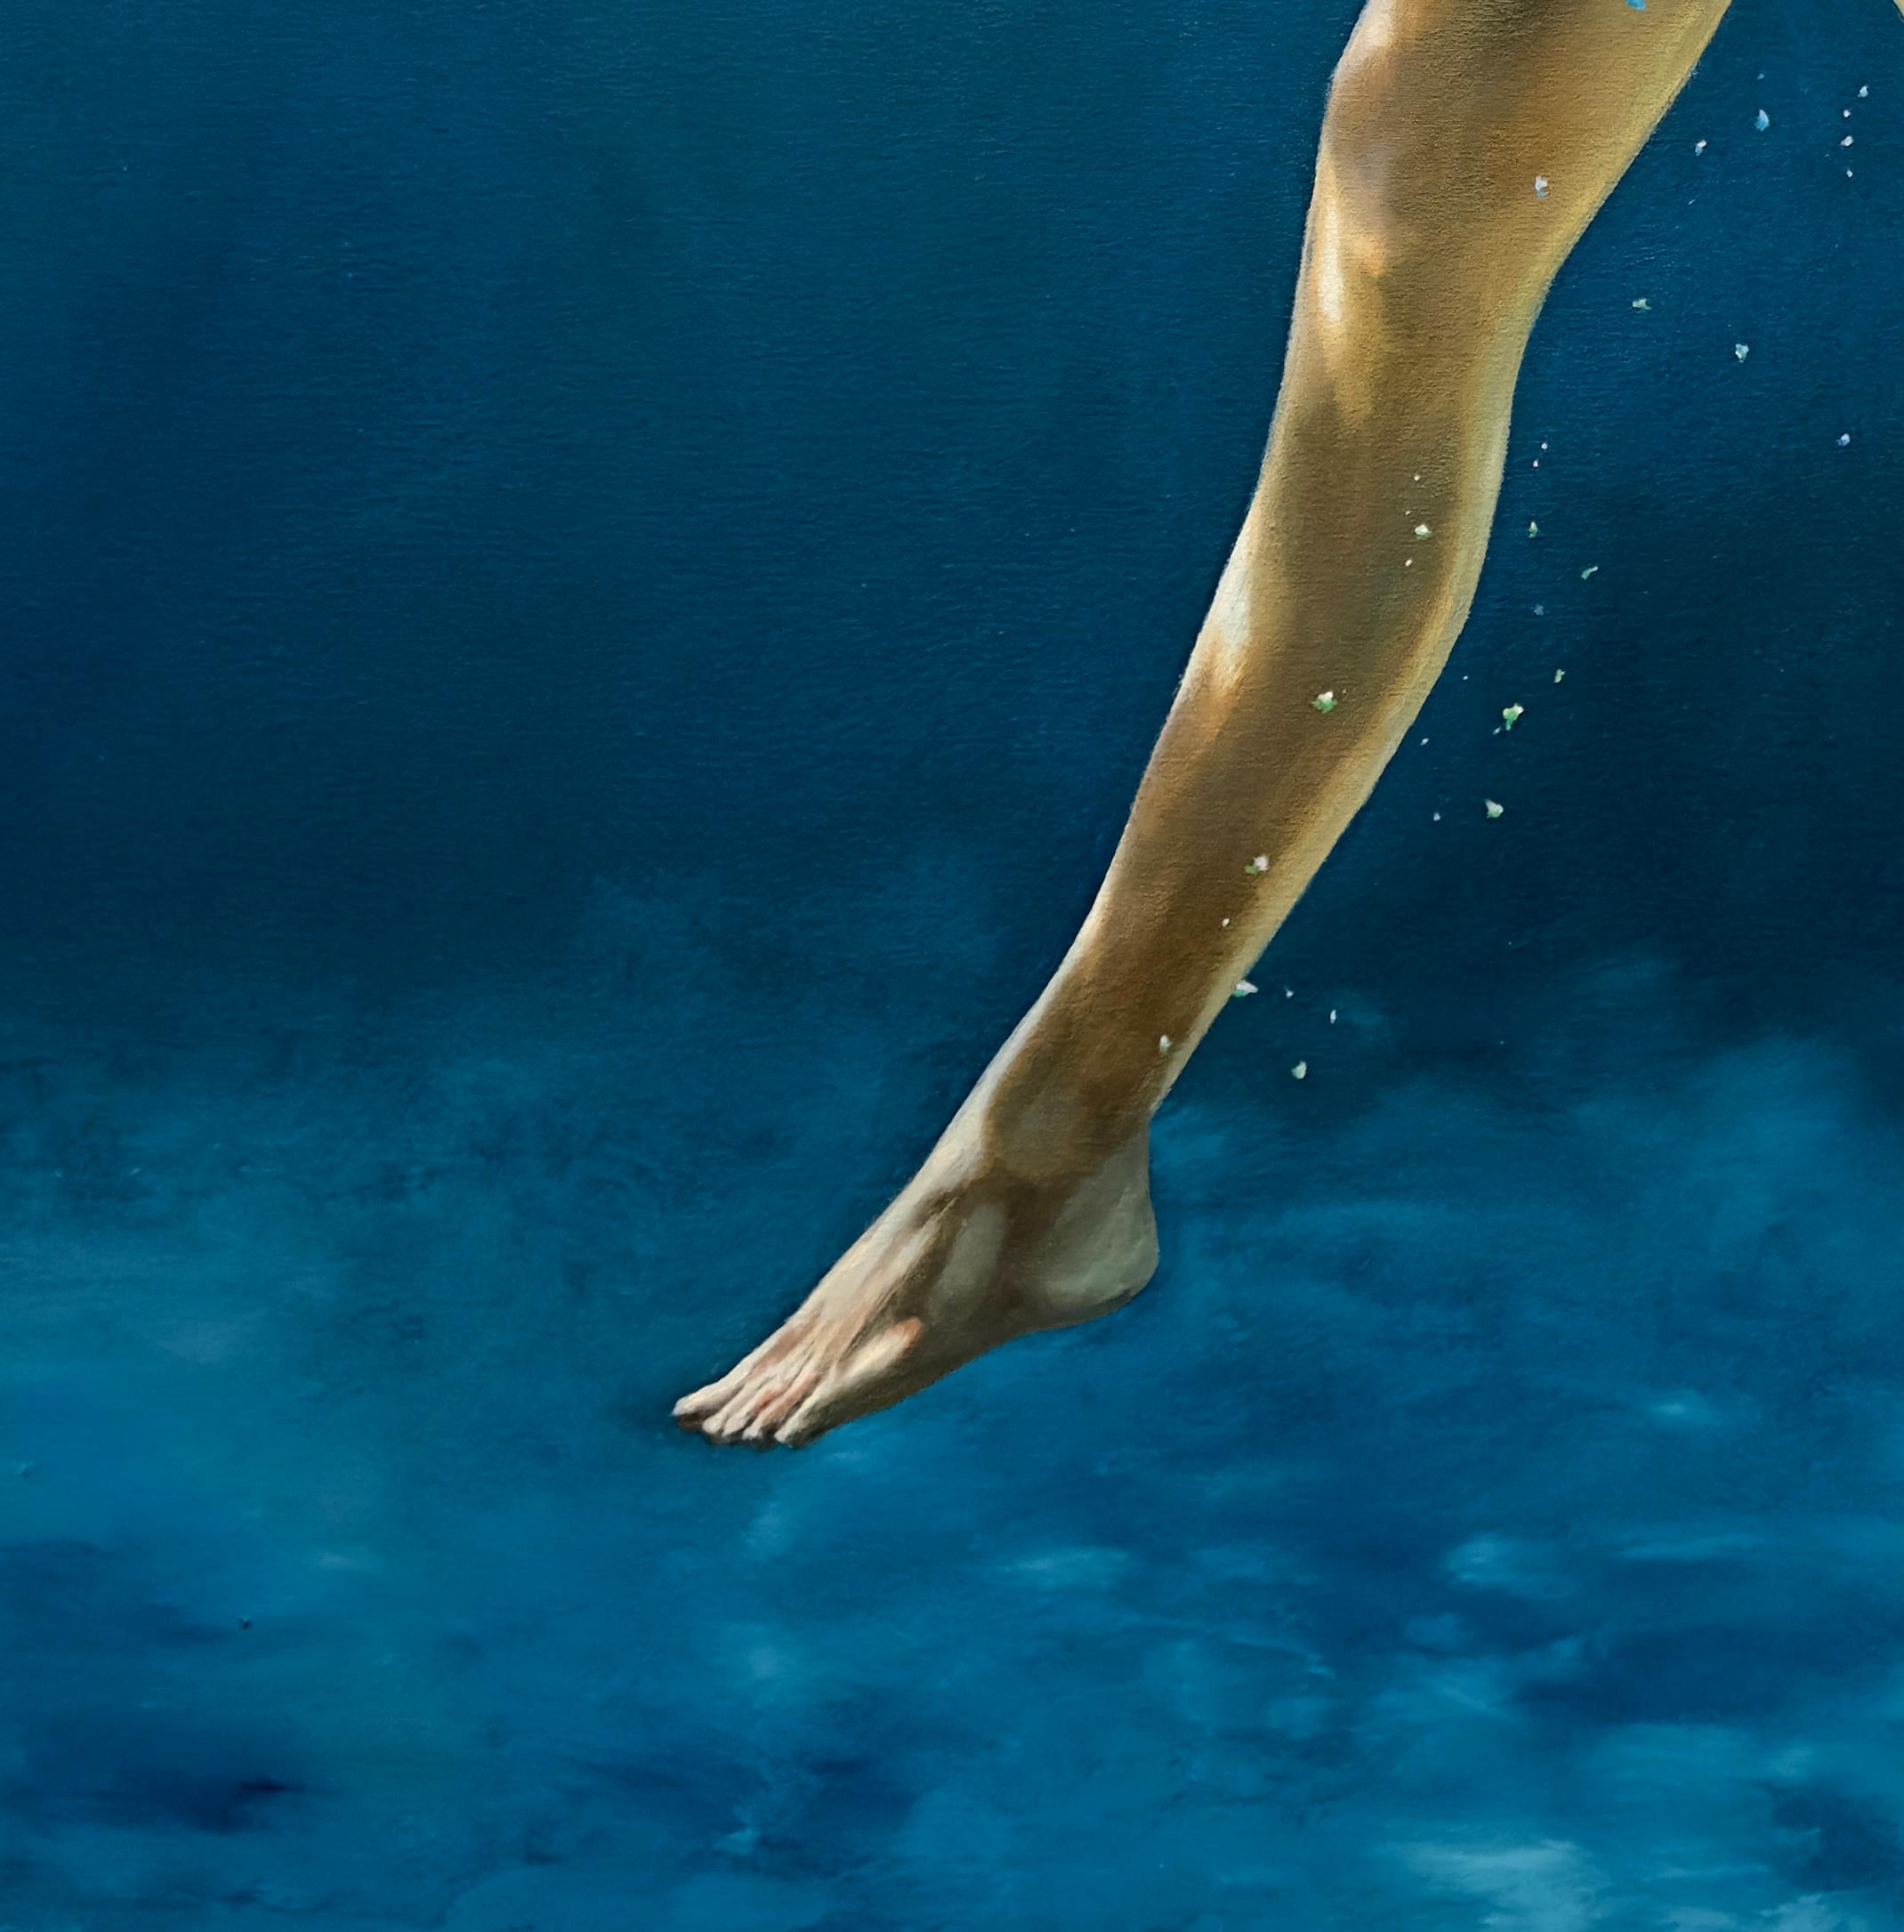 WATER DANCE - Contemporary Realism / Figurative / Swimmer / Blue 3